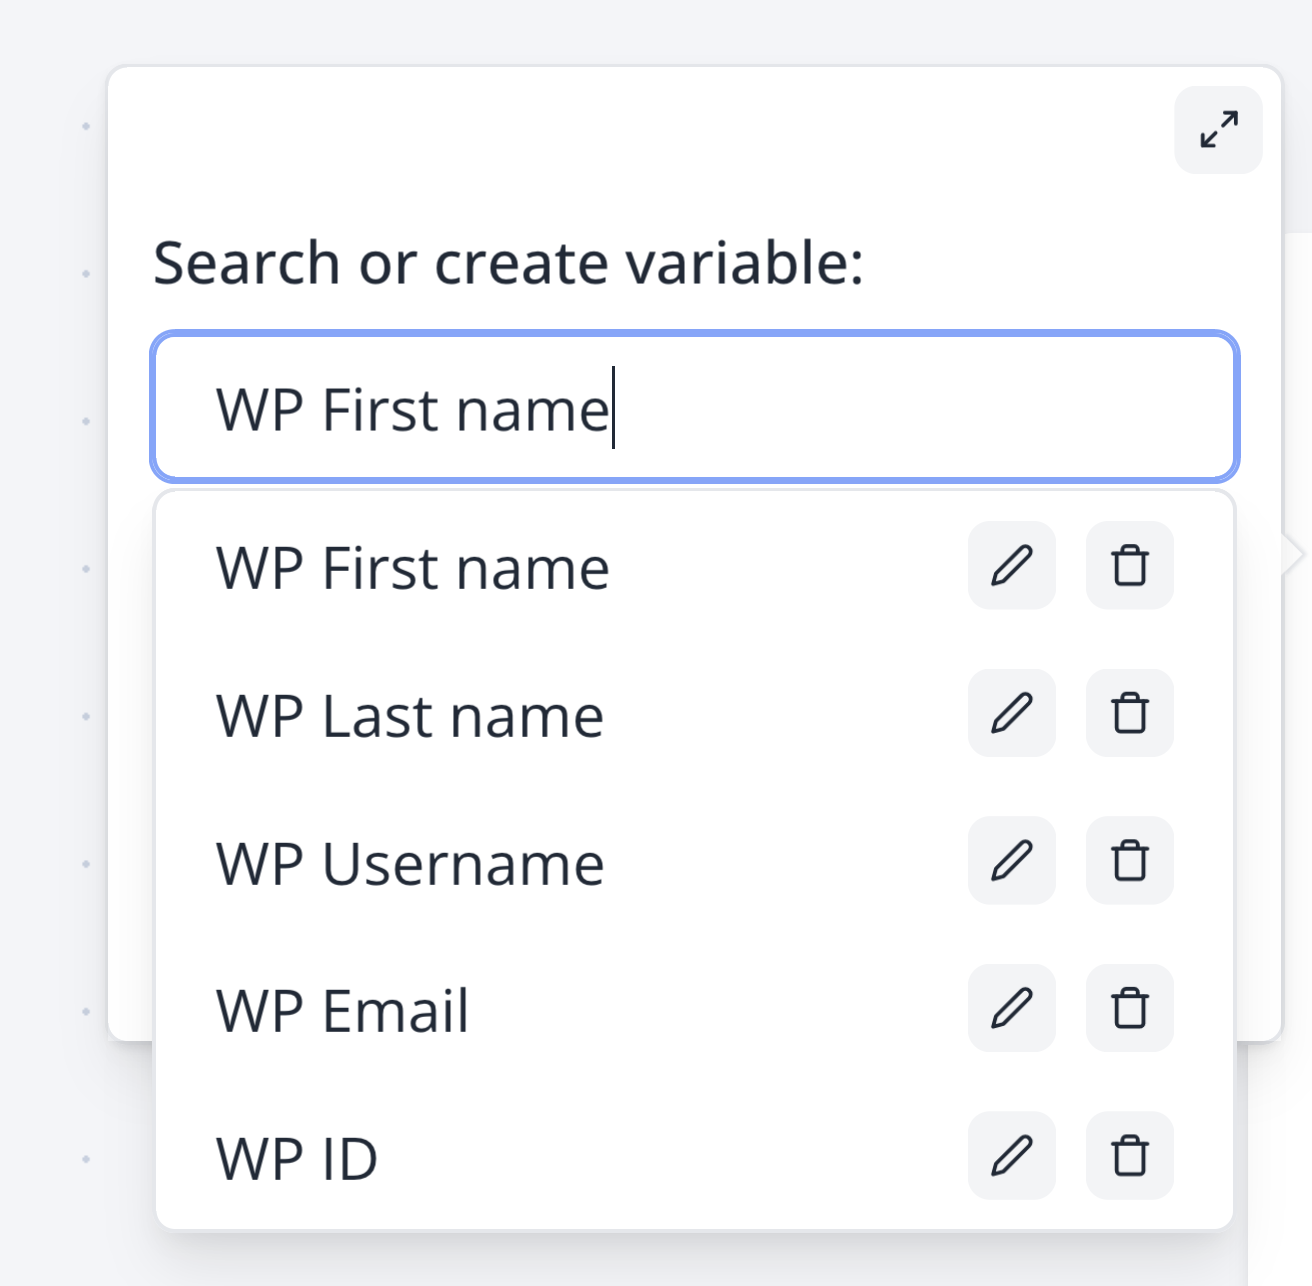 WP predefined variables